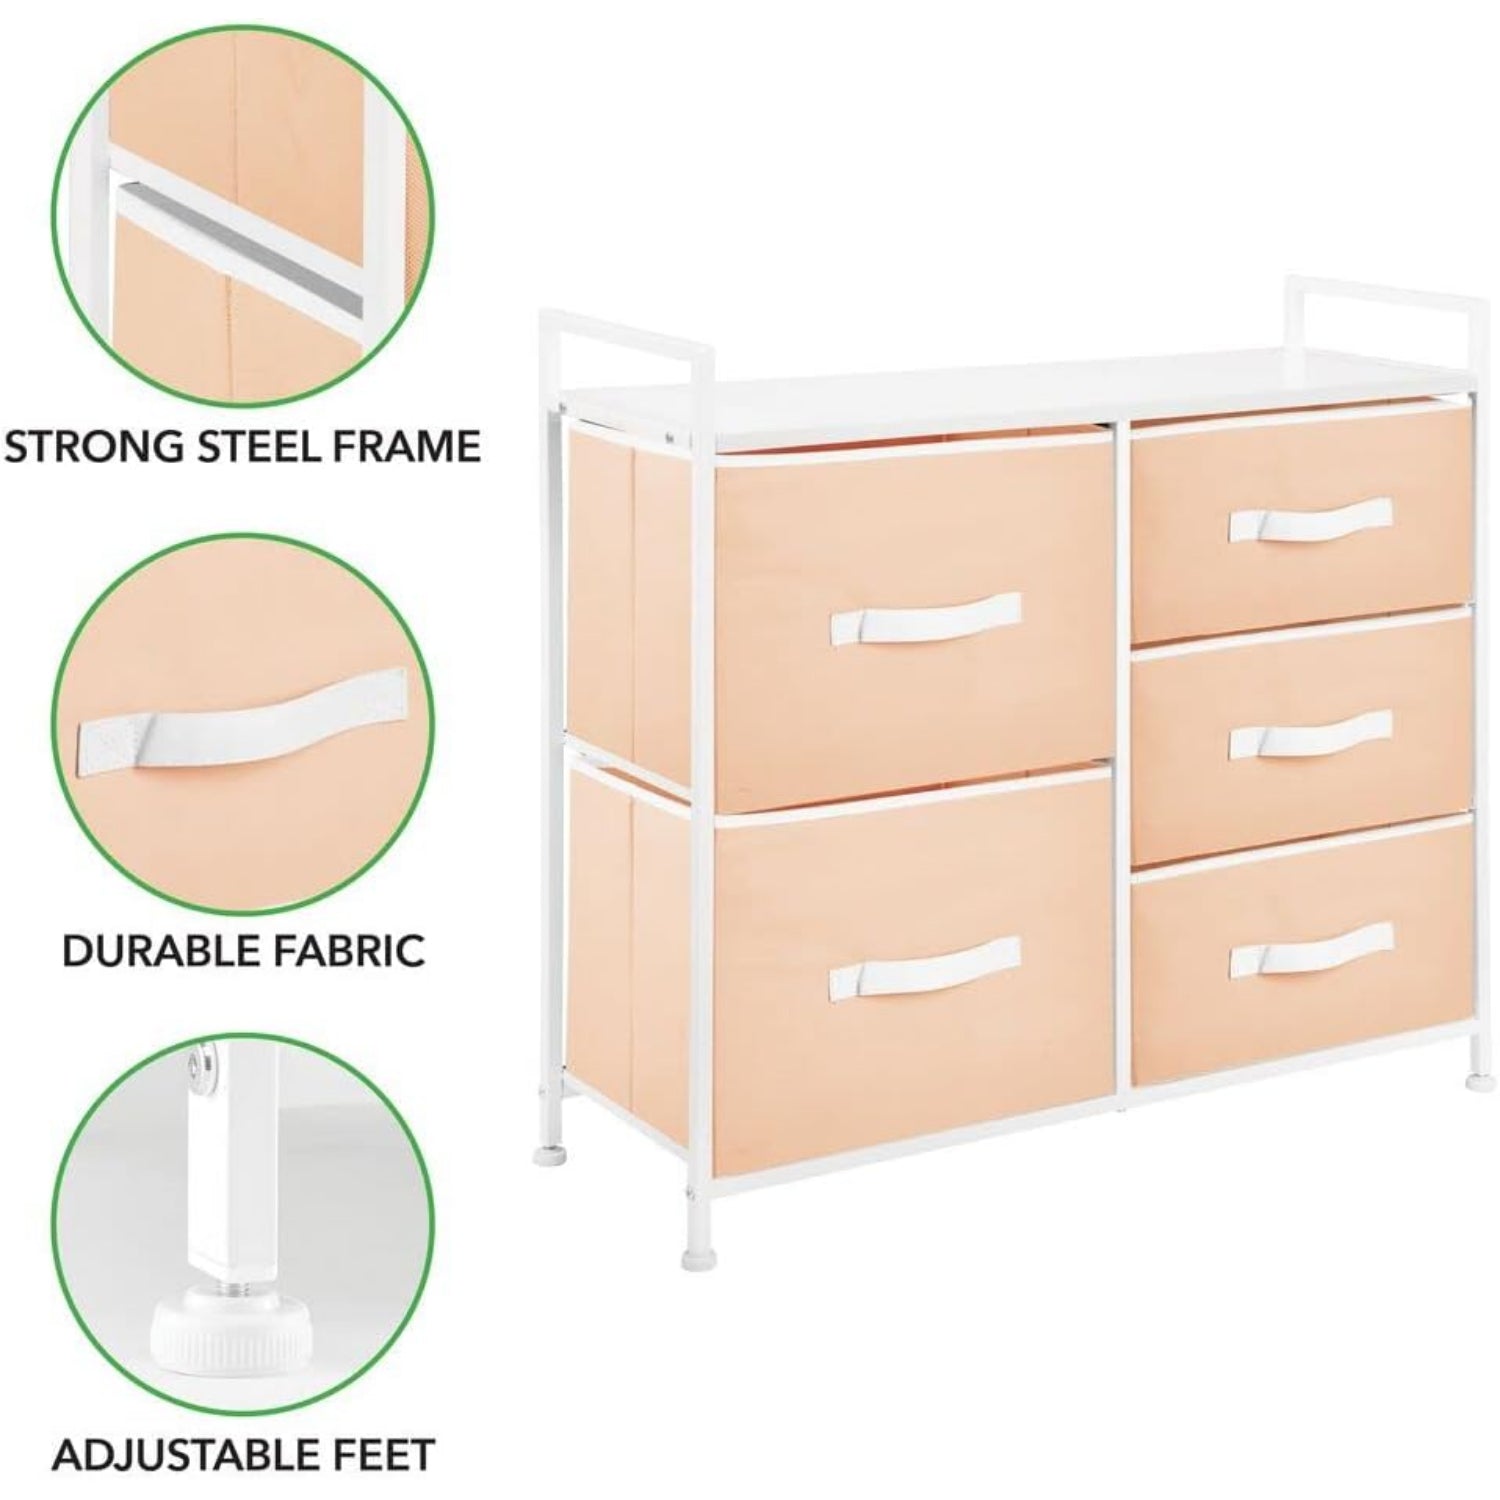 mDesign 30.03' High Steel Frame/Wood Top Storage Dresser with 5 Draws, Cantaloupe Peach/White